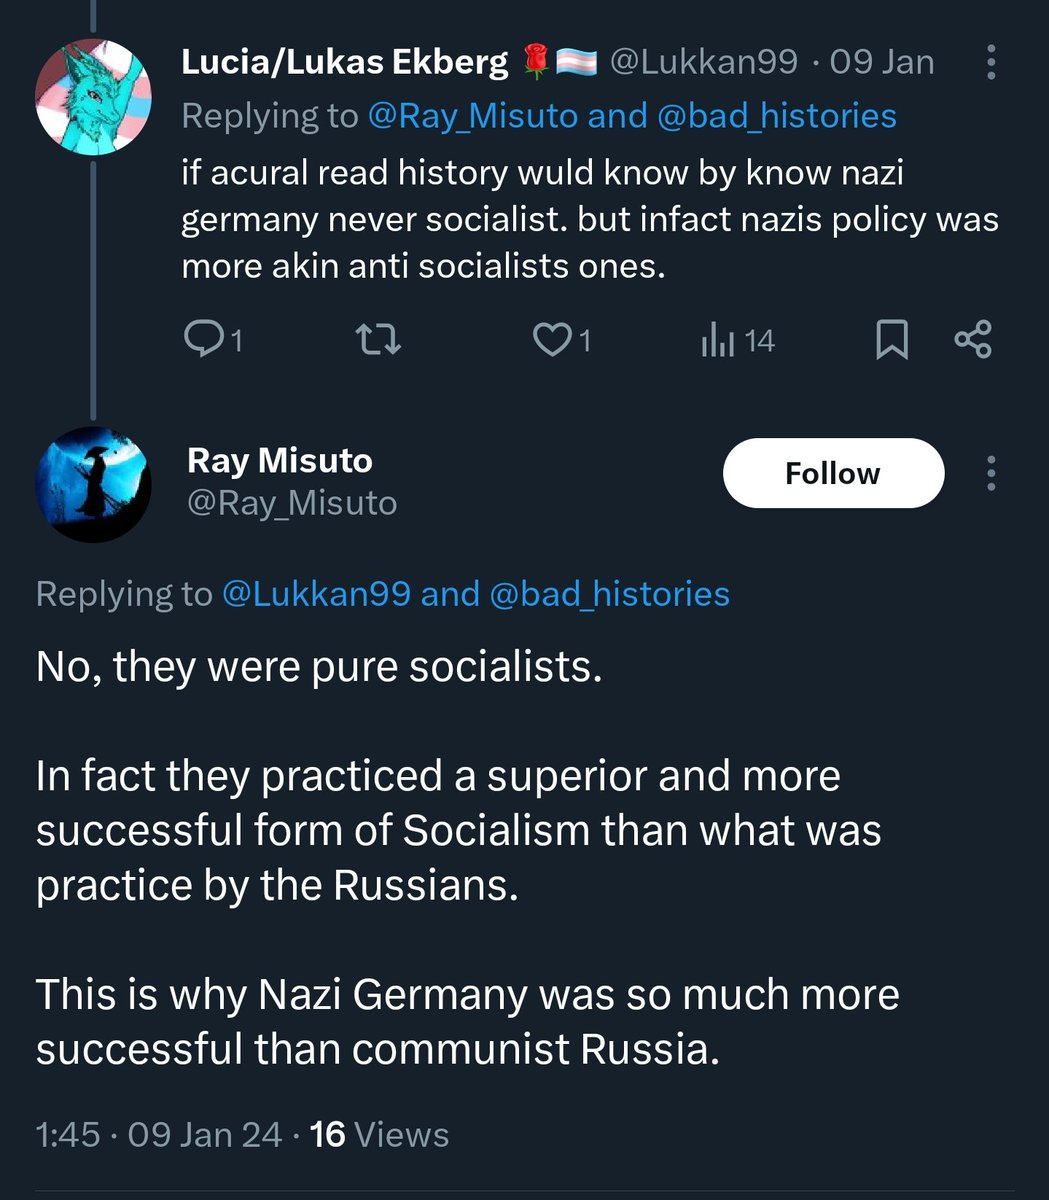 I have to laugh hard at people who think they understand 'leftists' while at the same time believing the Nazi's were Socialists lol This you?